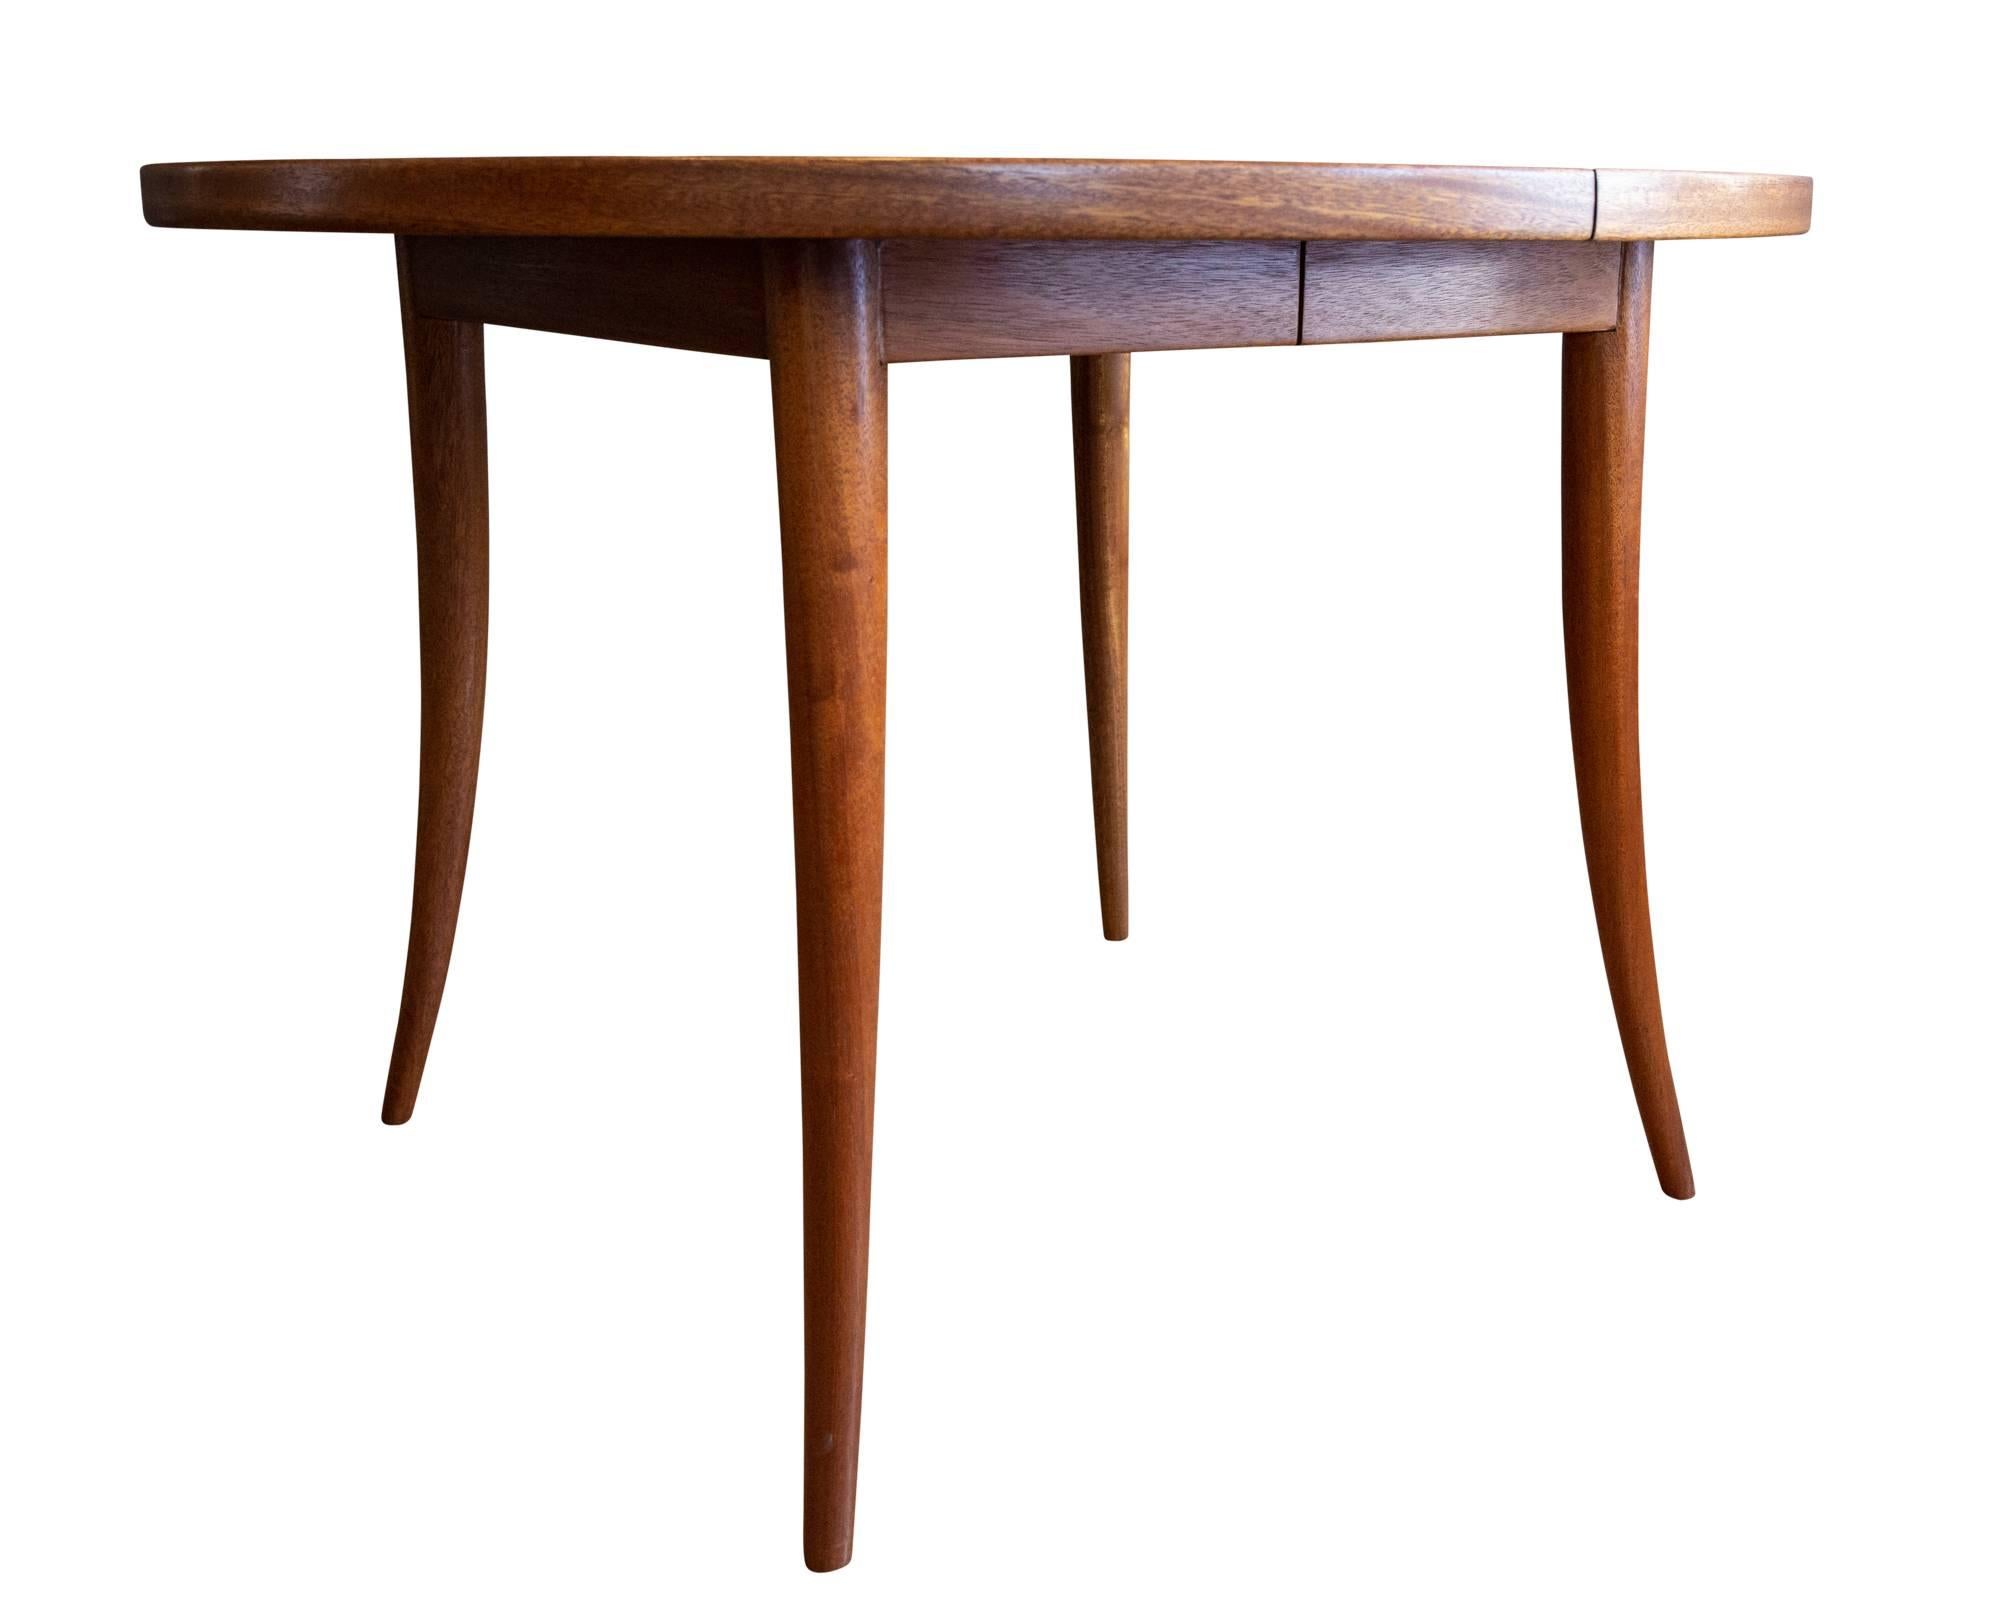 American Bleached Mahogany Dining Table by Harvey Probber